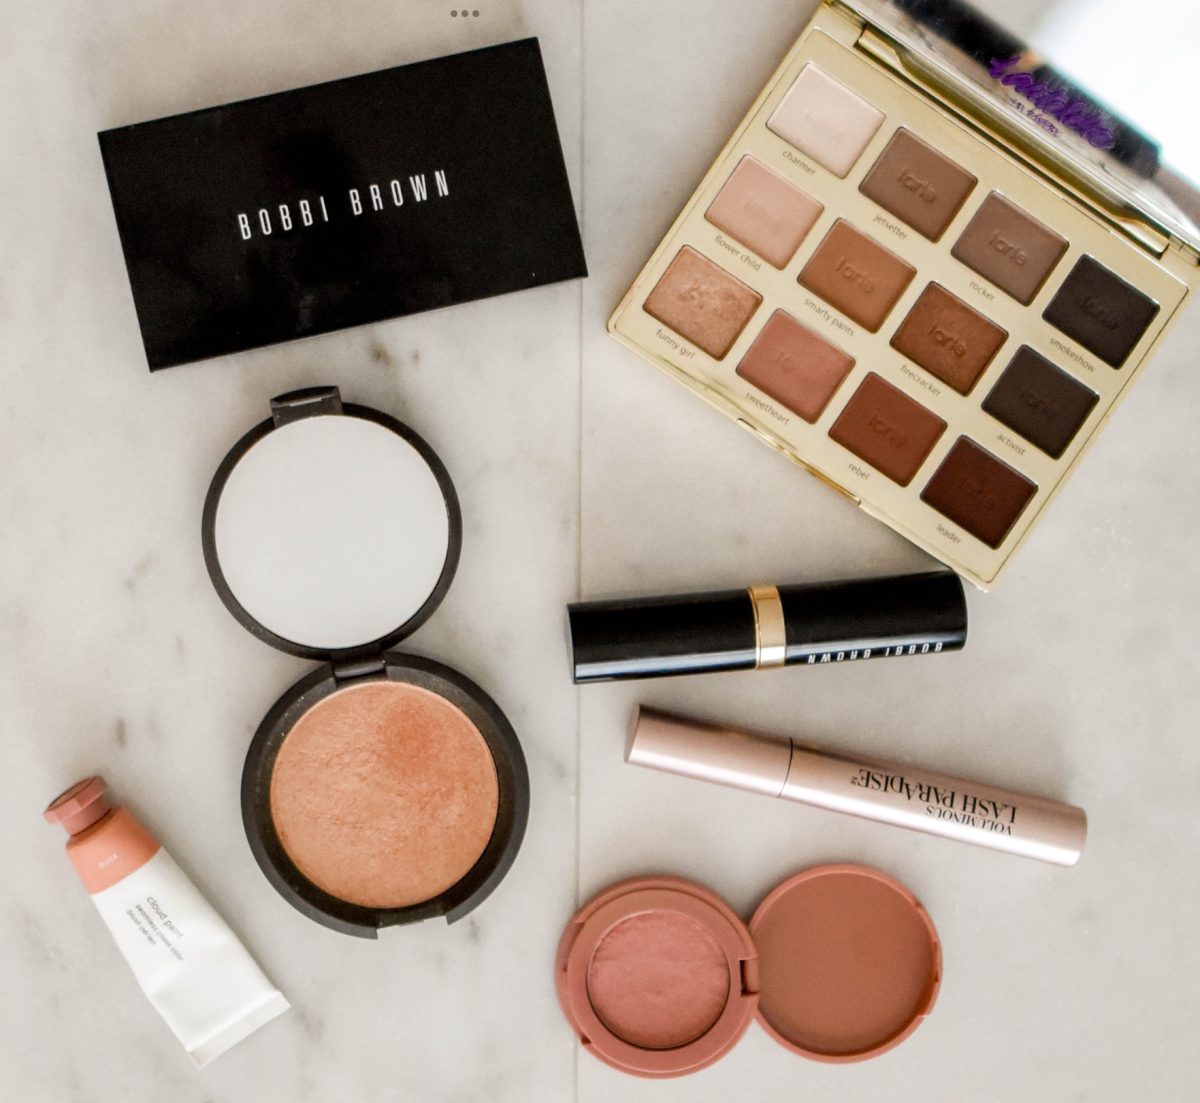 Make-up by Millie Bobbi Brown is displayed on a counter.